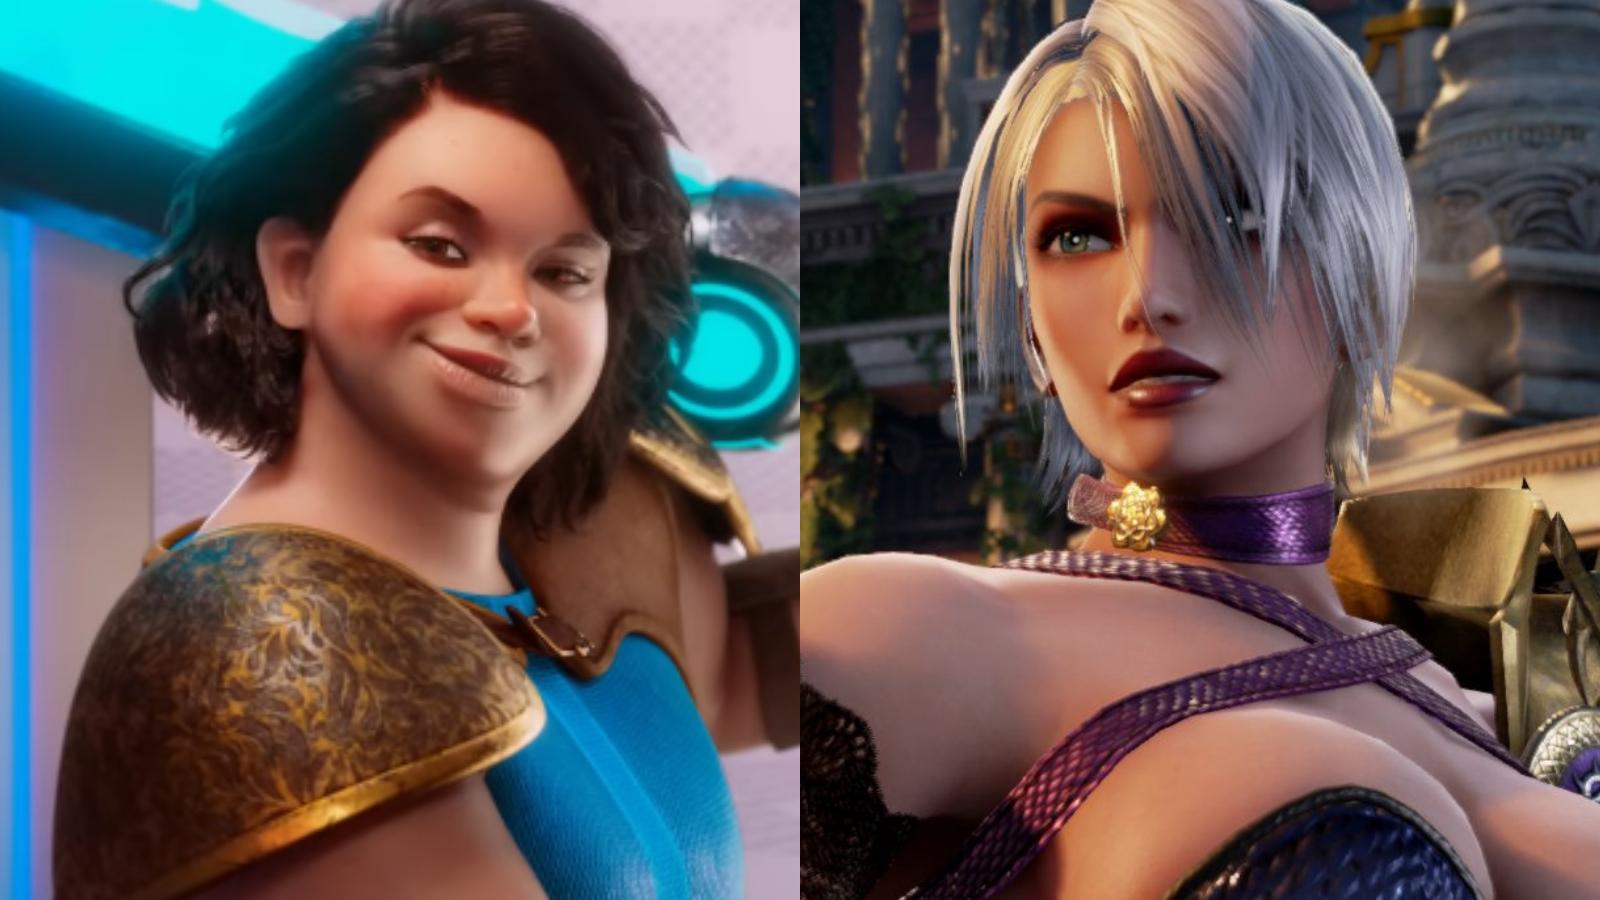 dove ad against sexualized female game characters